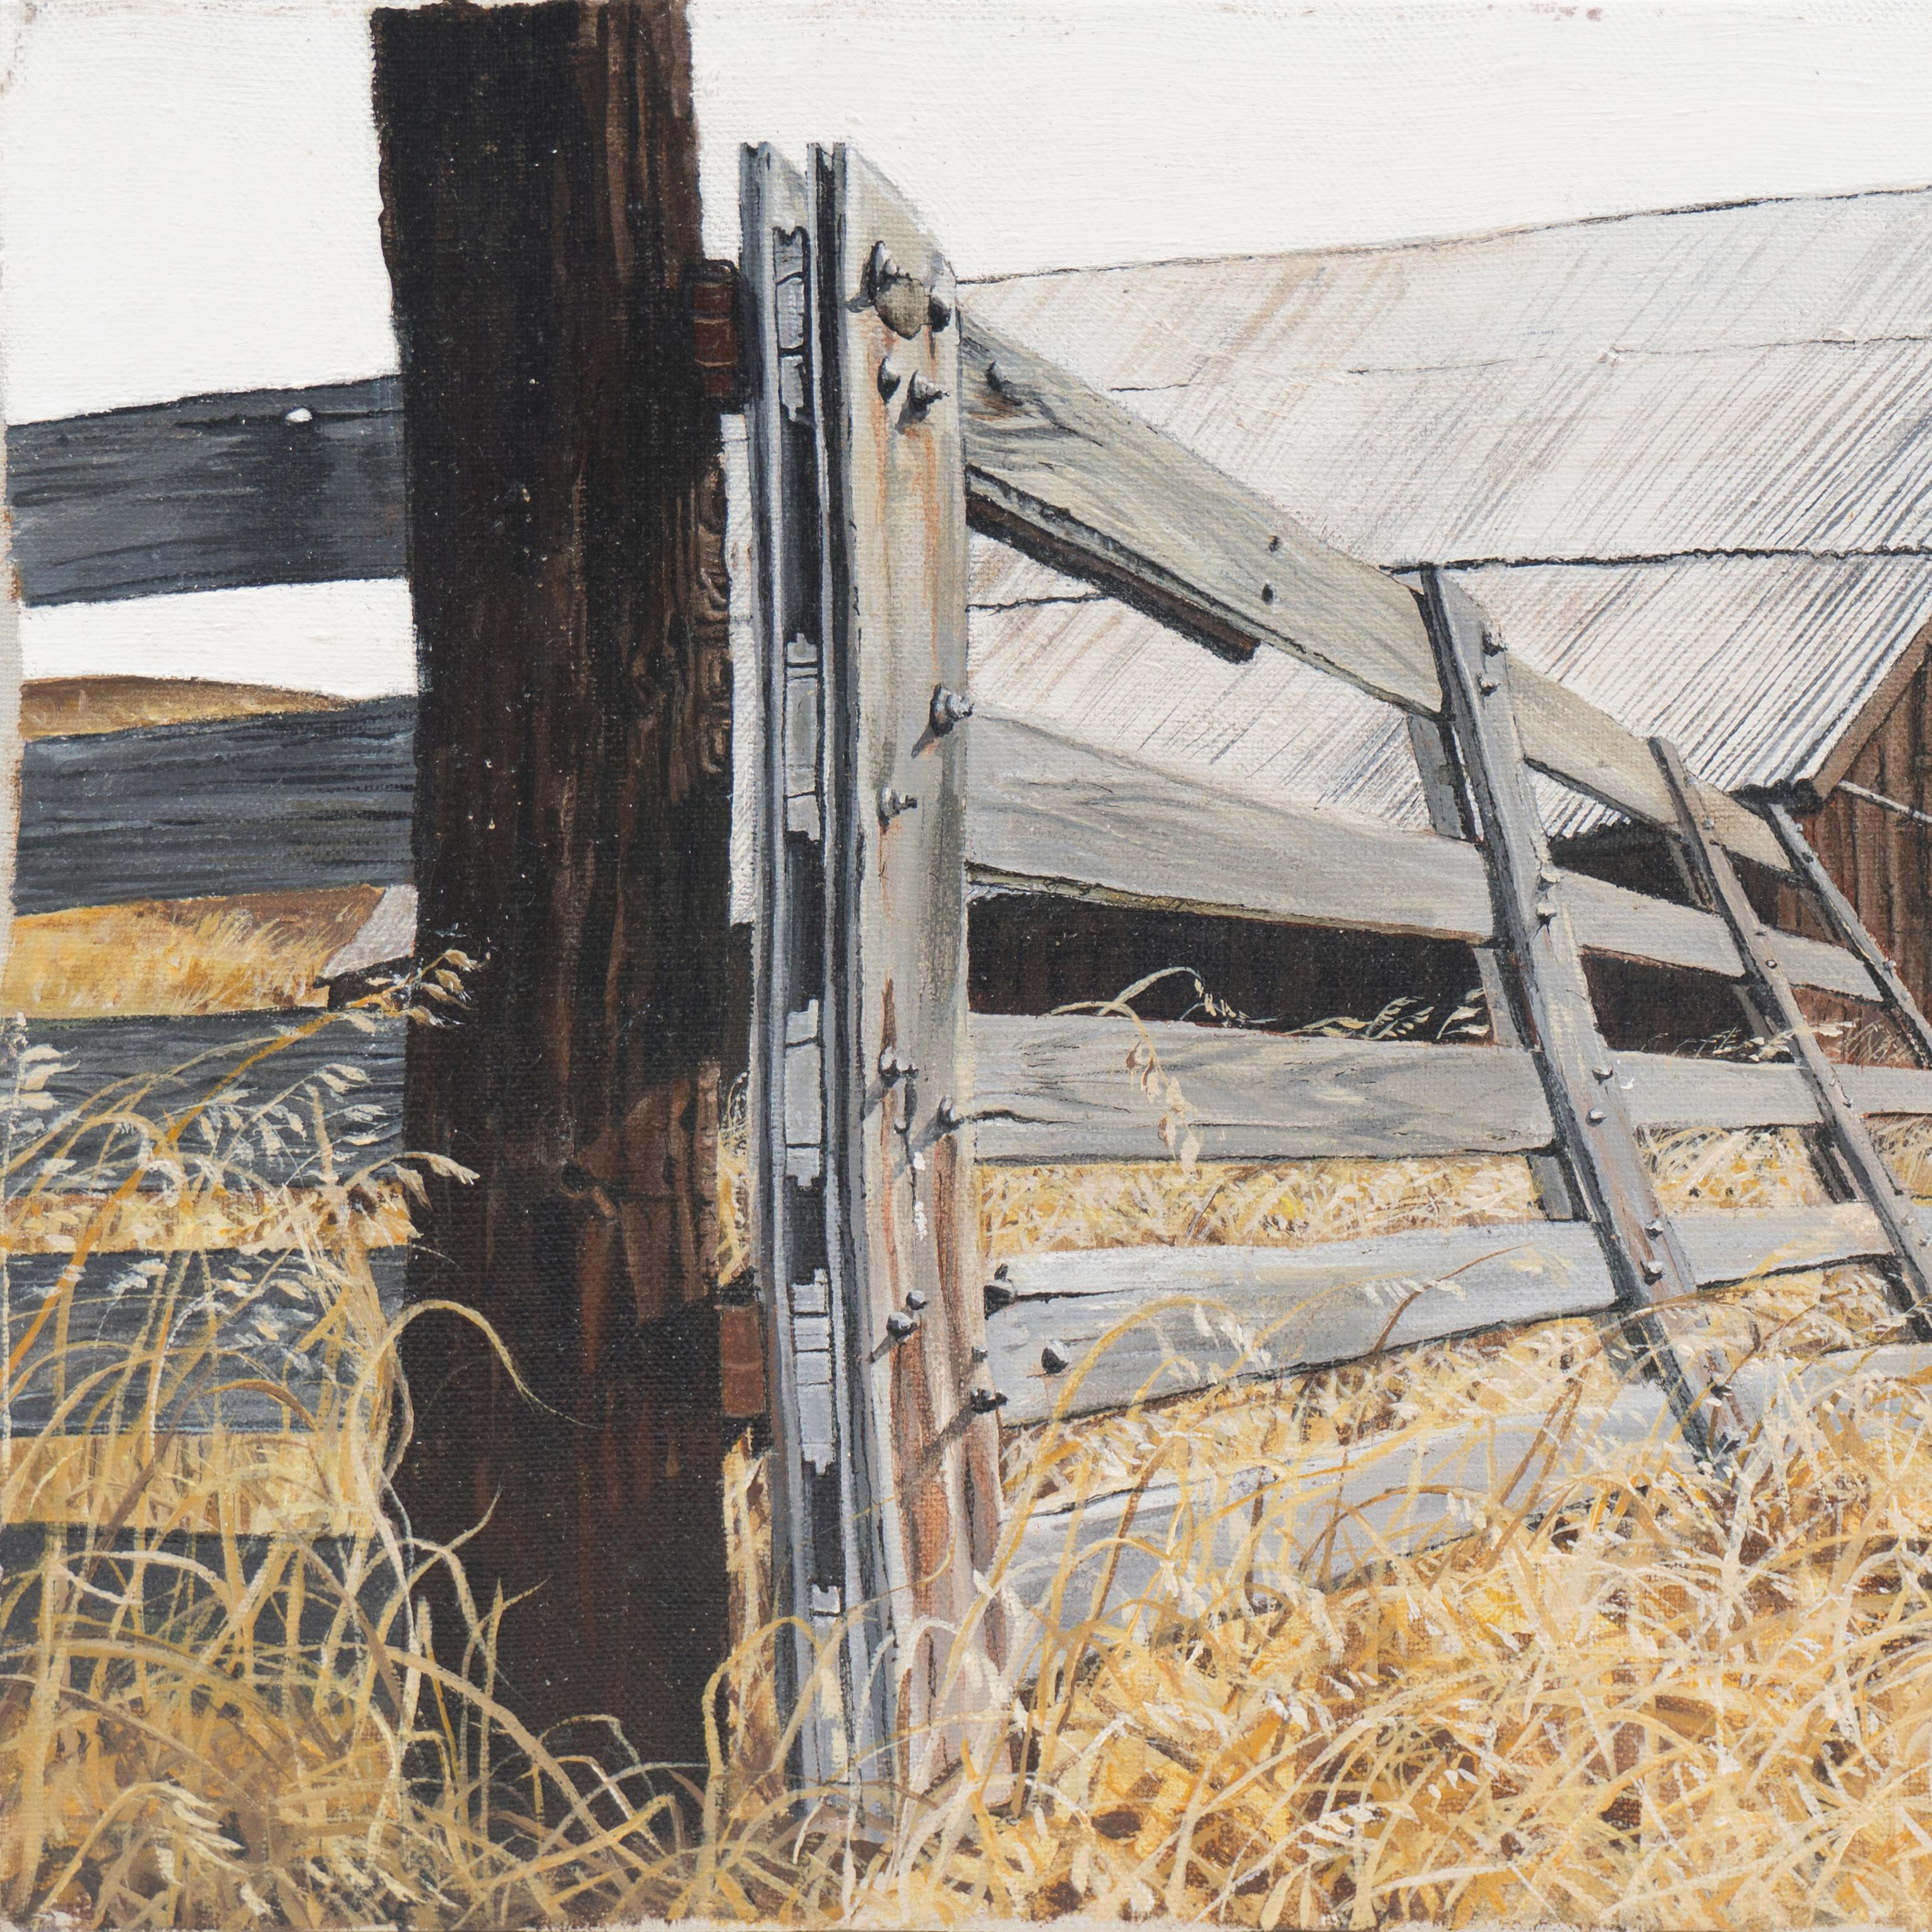 'The Old Wooden Gate', Americana, rustic landscape with Barn, 1970's - Beige Landscape Painting by Dianne Moss Walling